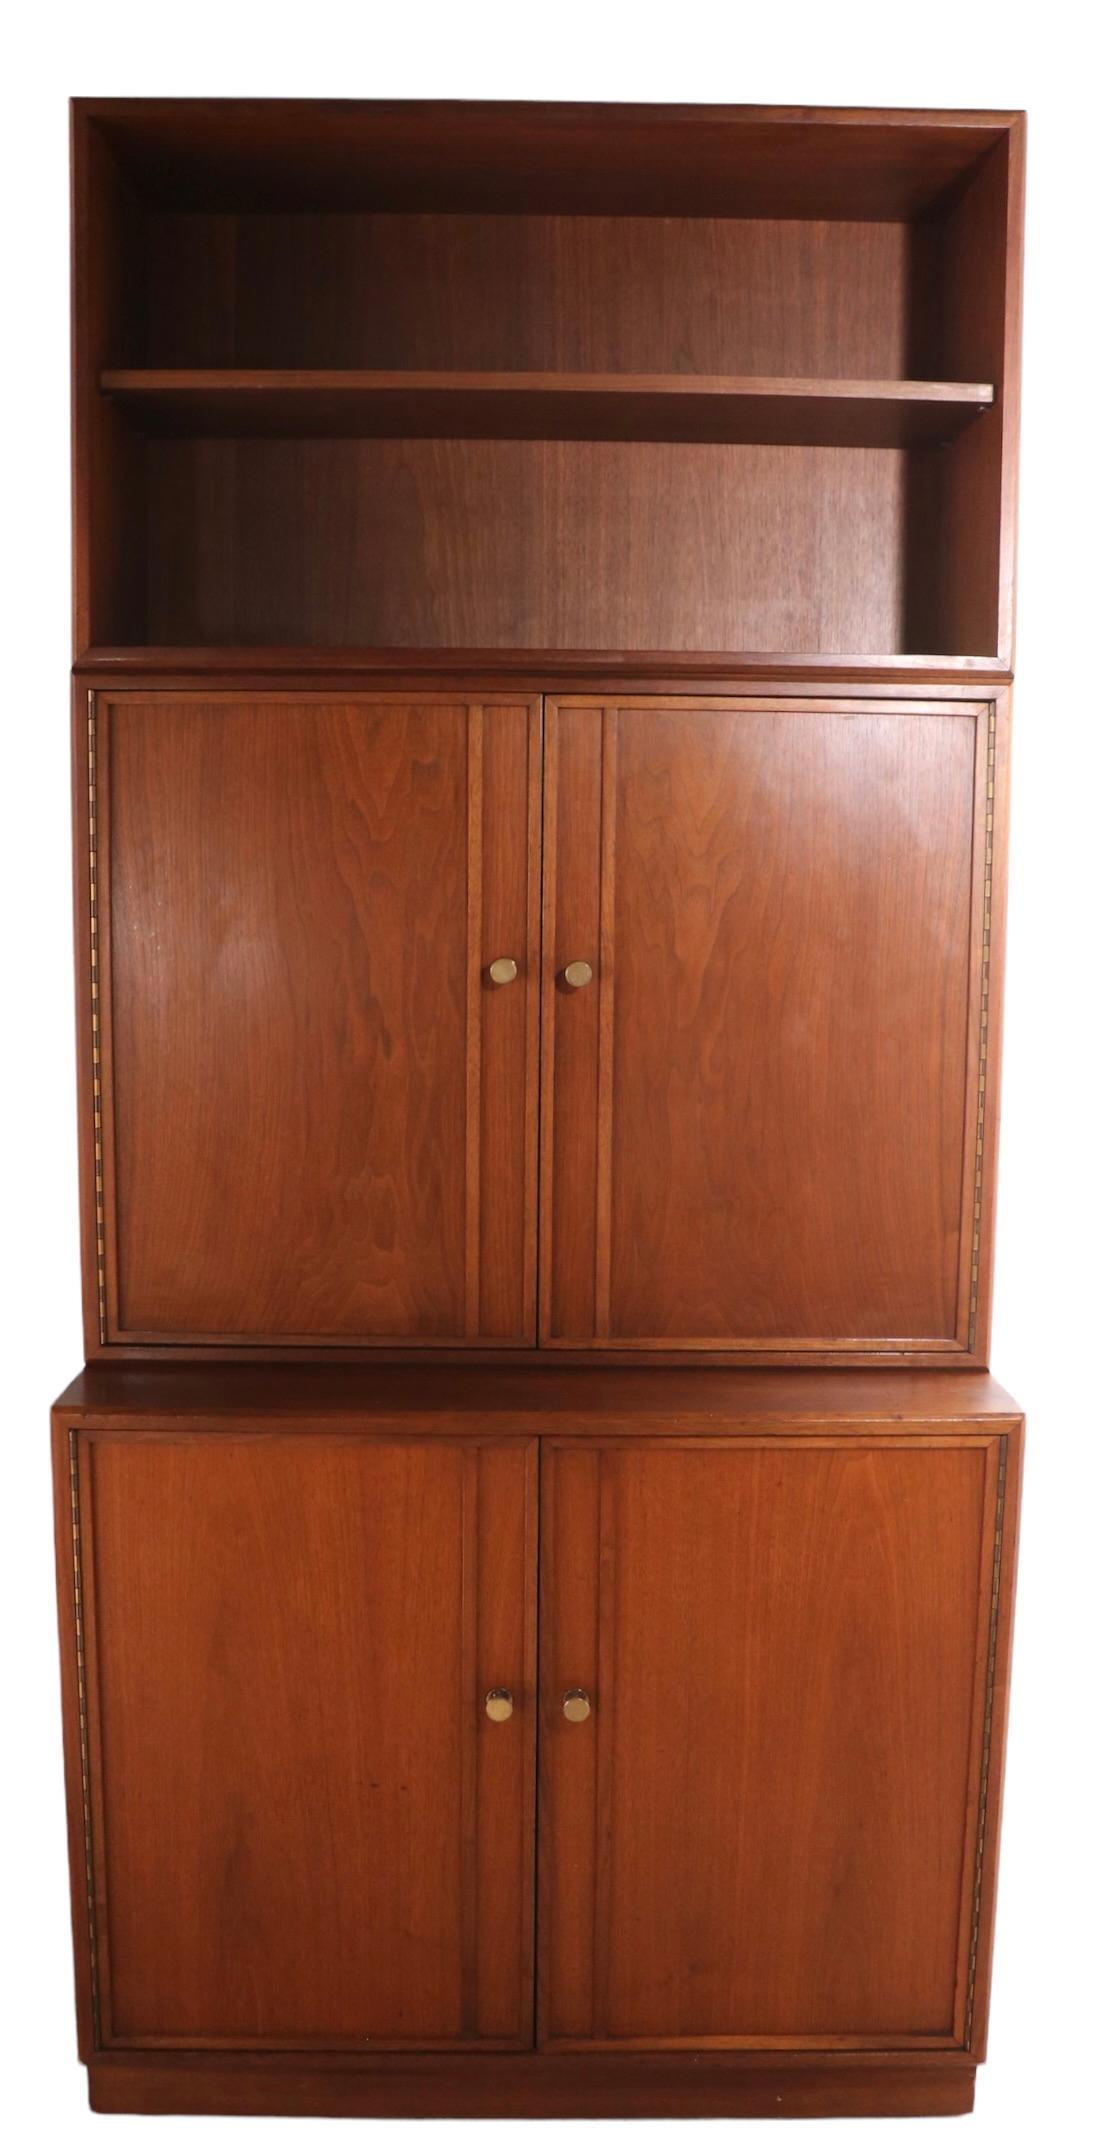 American Mid-Century Three Bay Shelf Unit by West Michigan Furniture Co. After Cadovius